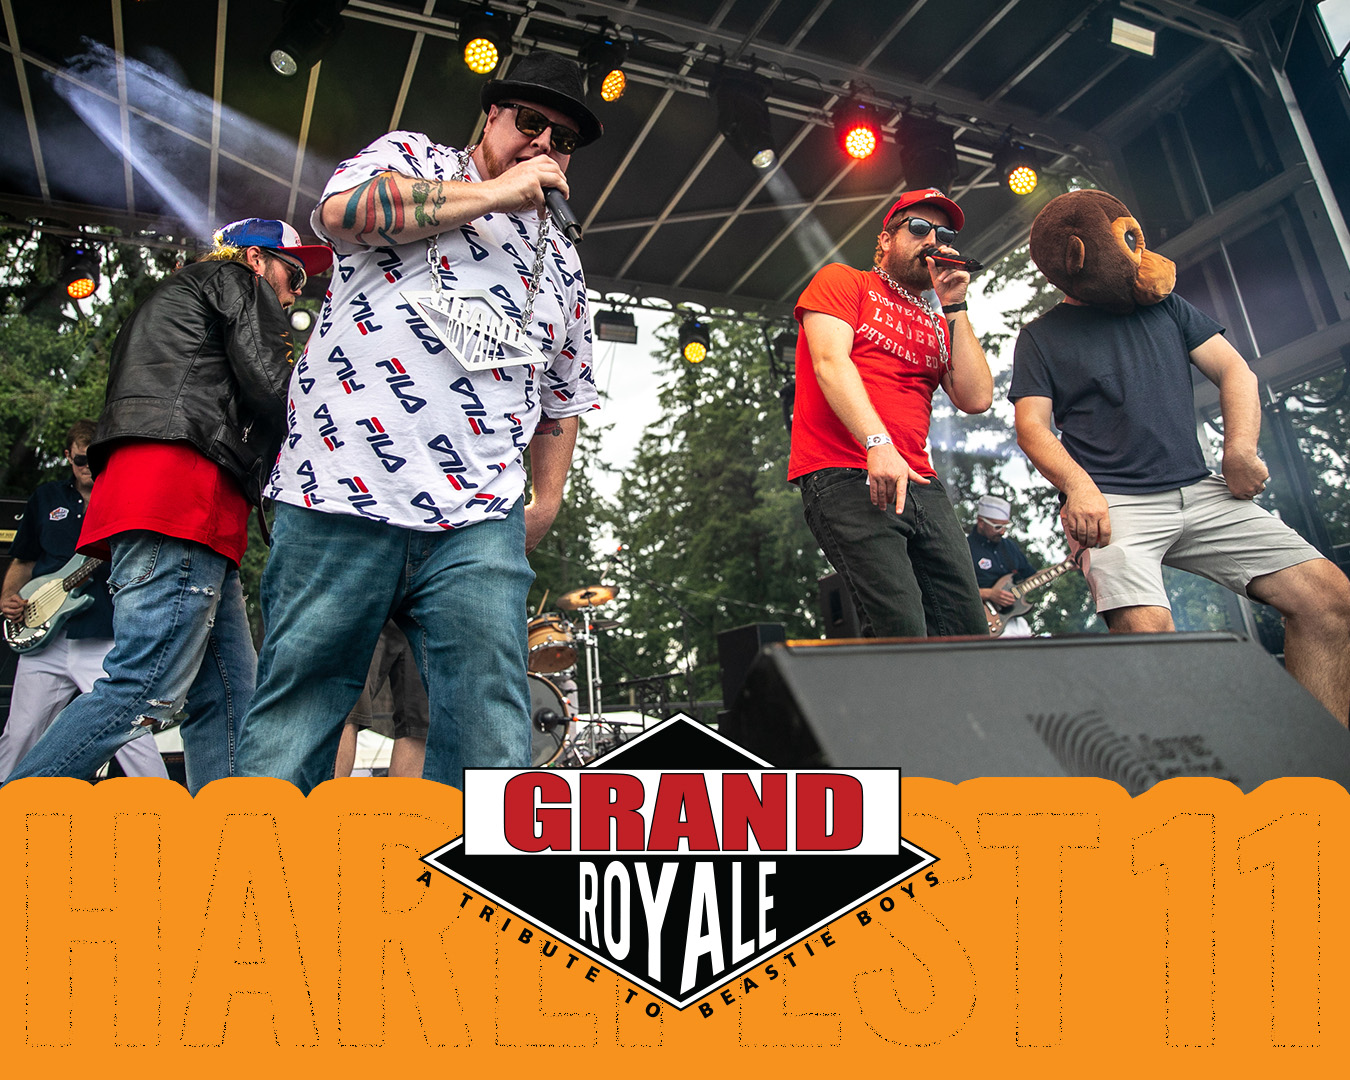 Grand Royale - Beastie Boys  Tribute at Harefest 10